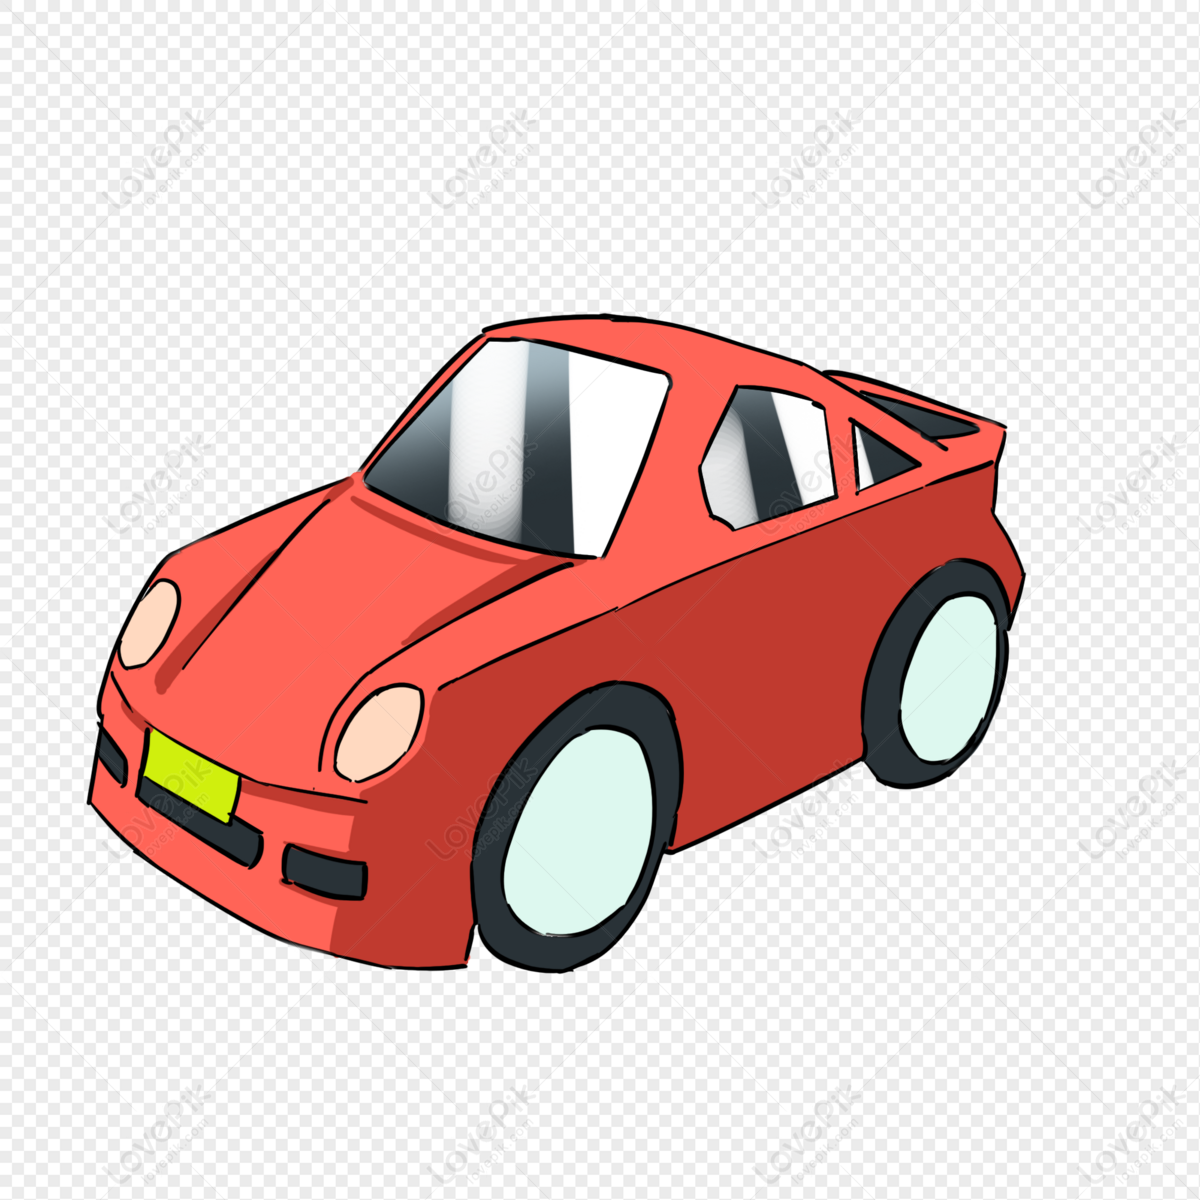 Red Car Toy PNG Transparent And Clipart Image For Free Download - Lovepik |  401144856